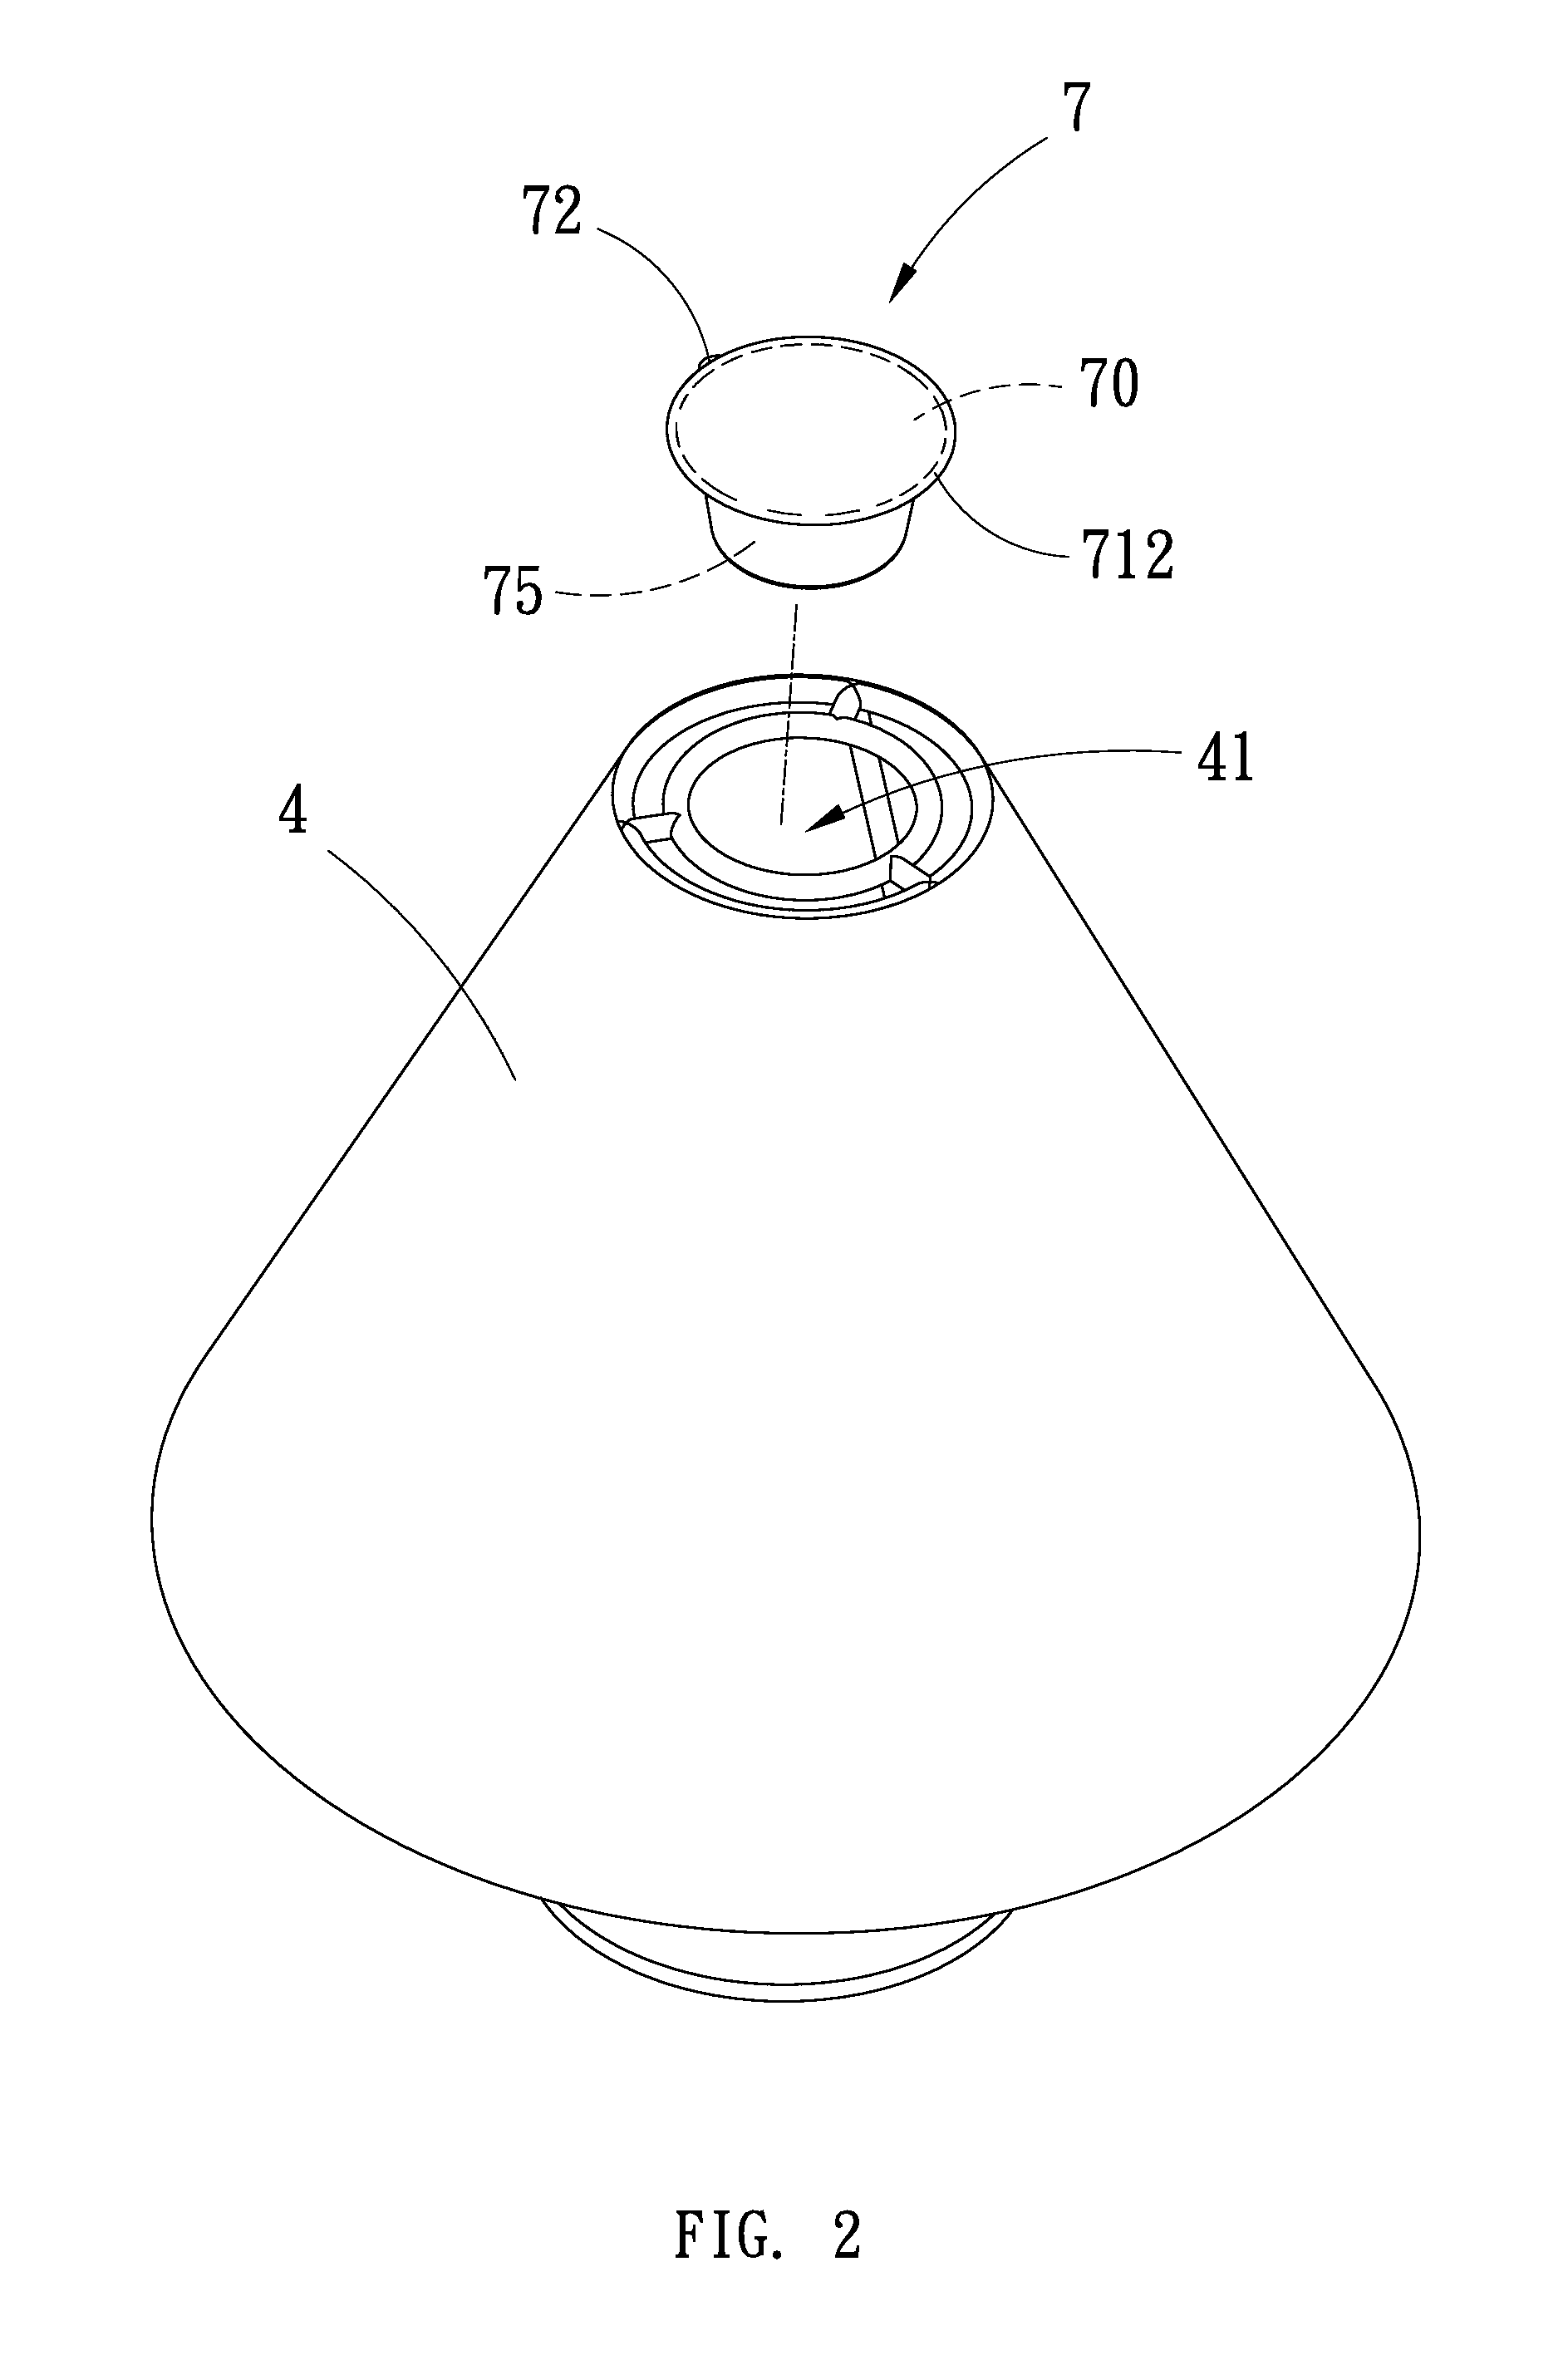 System having a lamp assembled with an aroma capsule that disperses scent